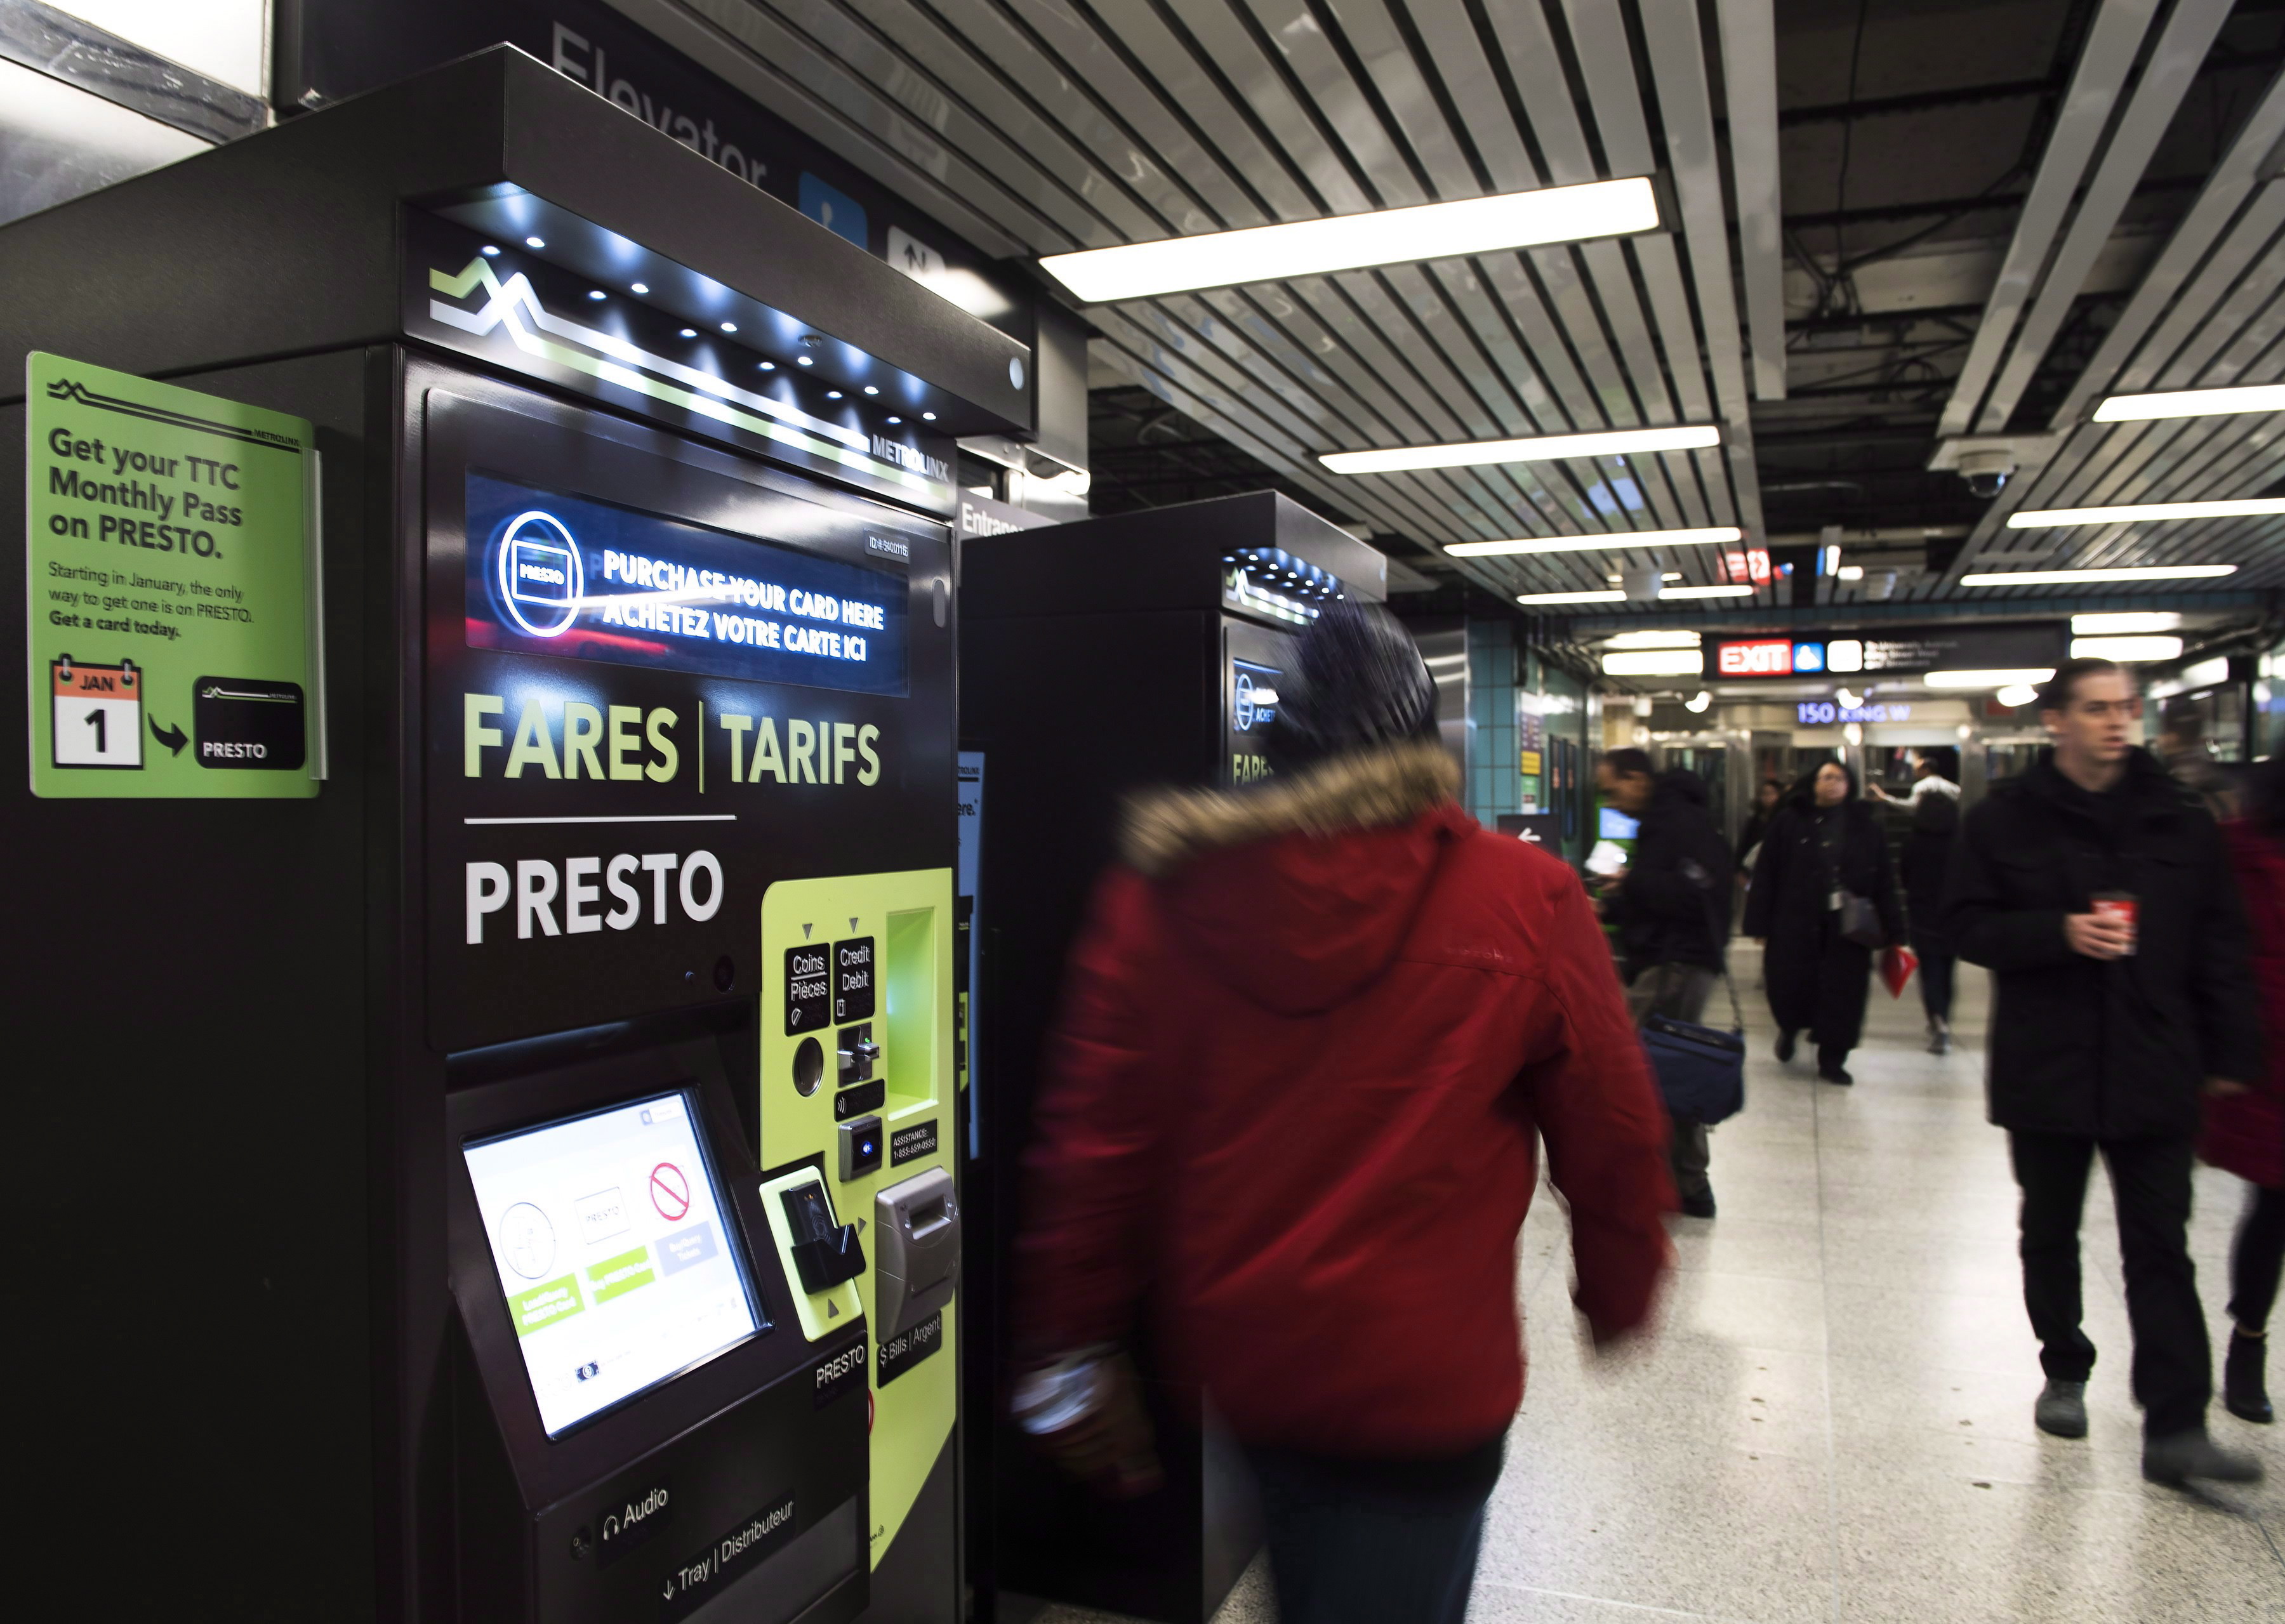 Toronto fare integration delayed by overambitious timelines